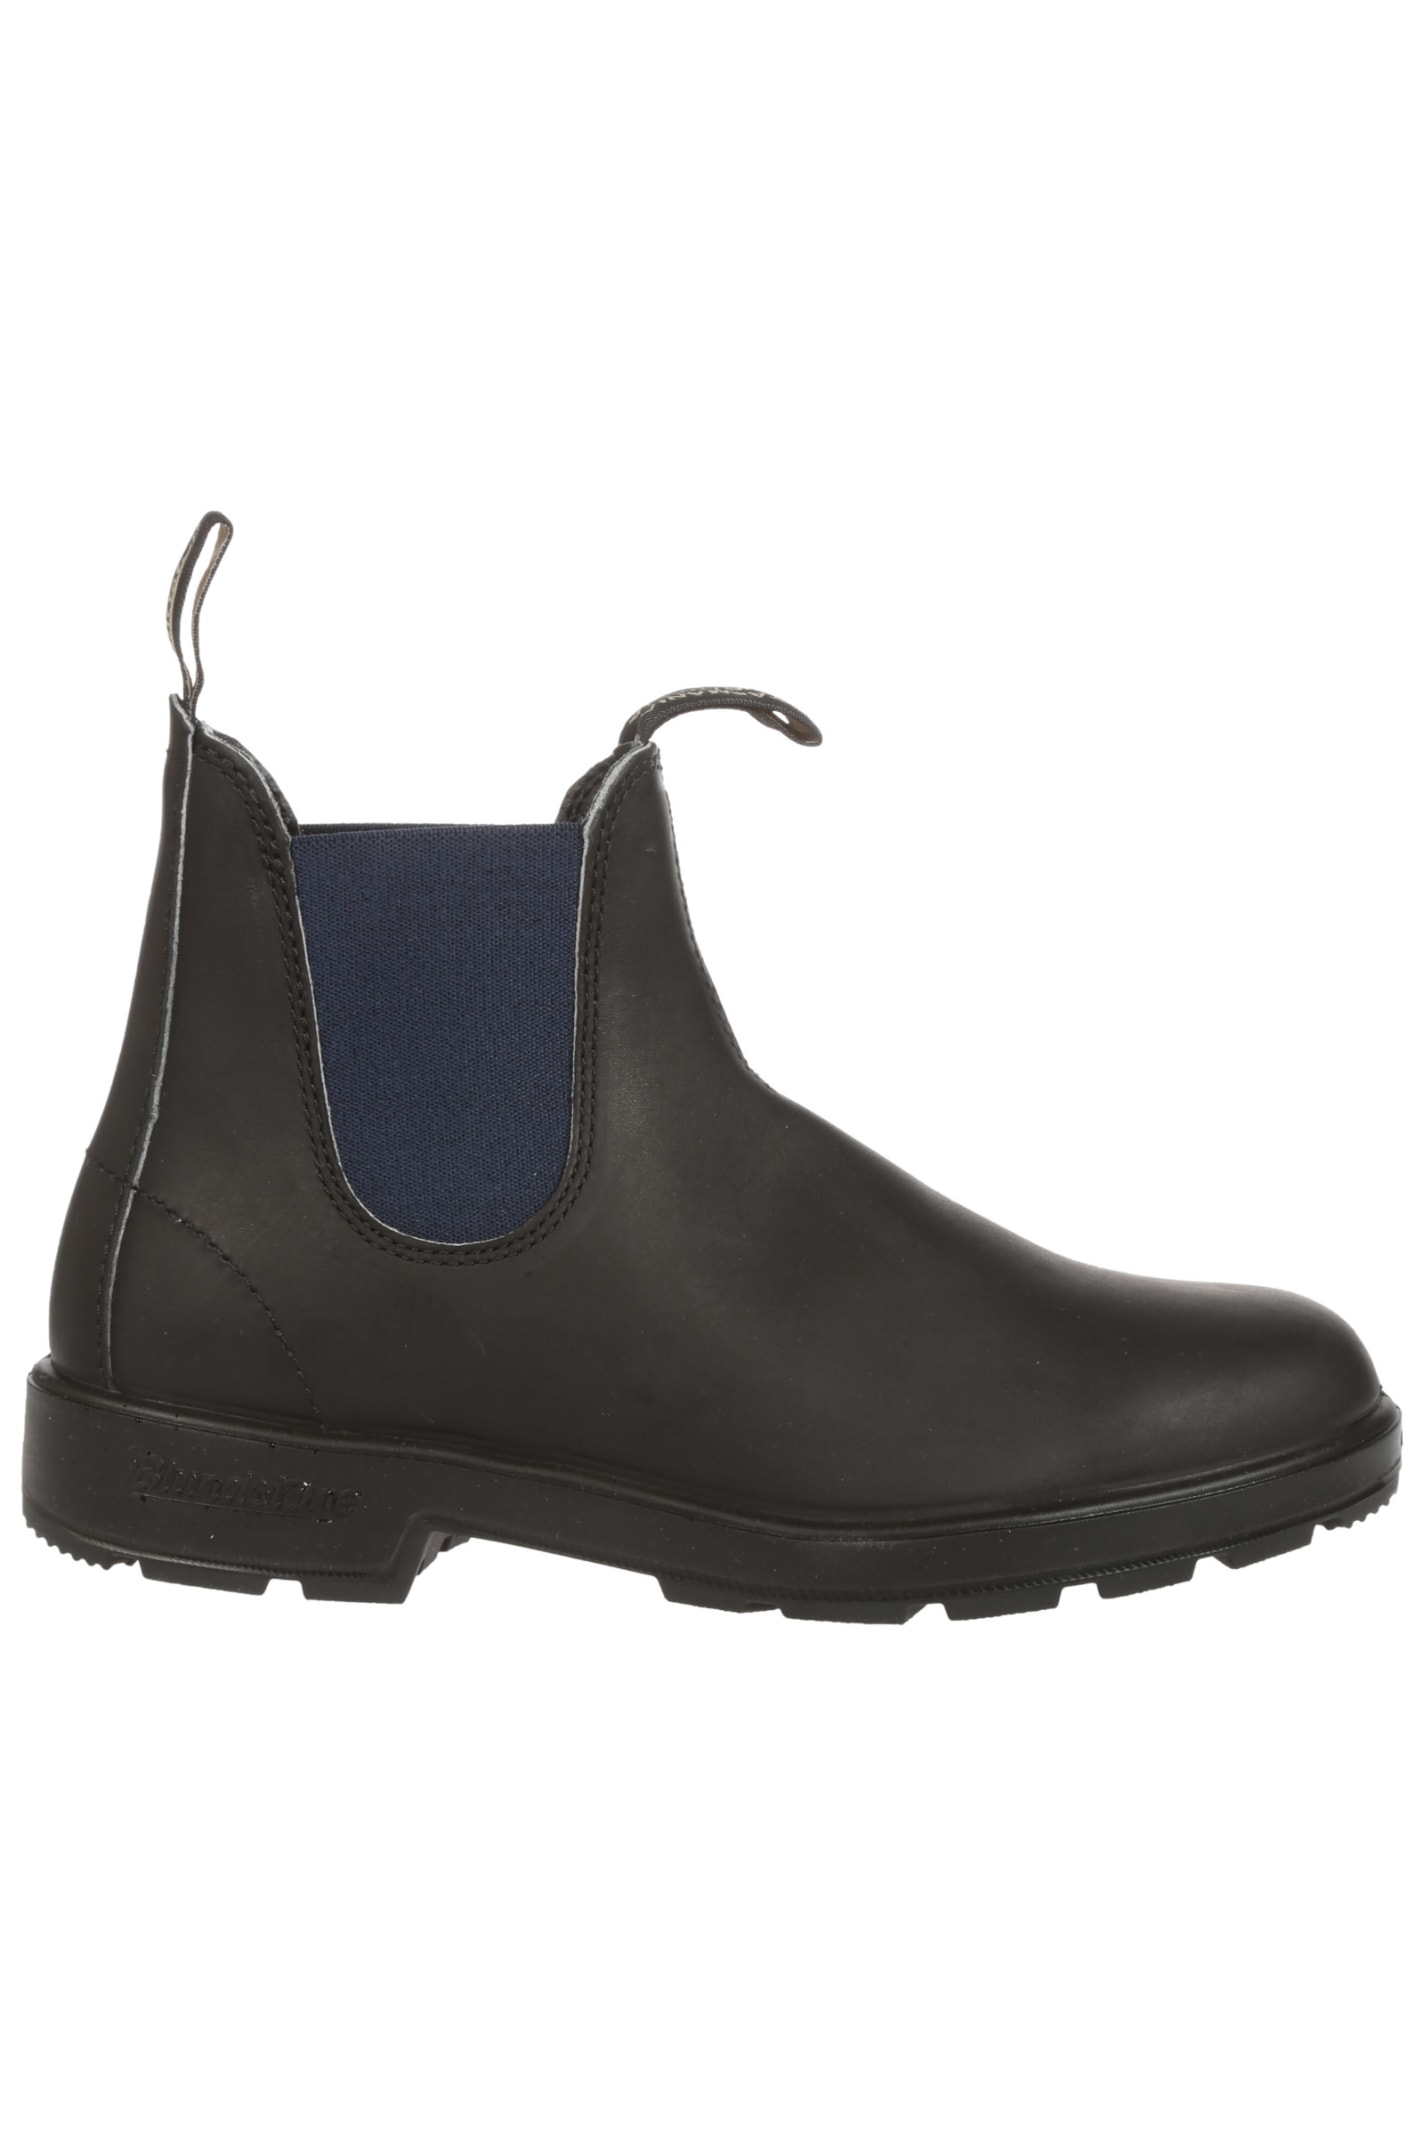 Blundstone Coloured Elastic Sided Boots